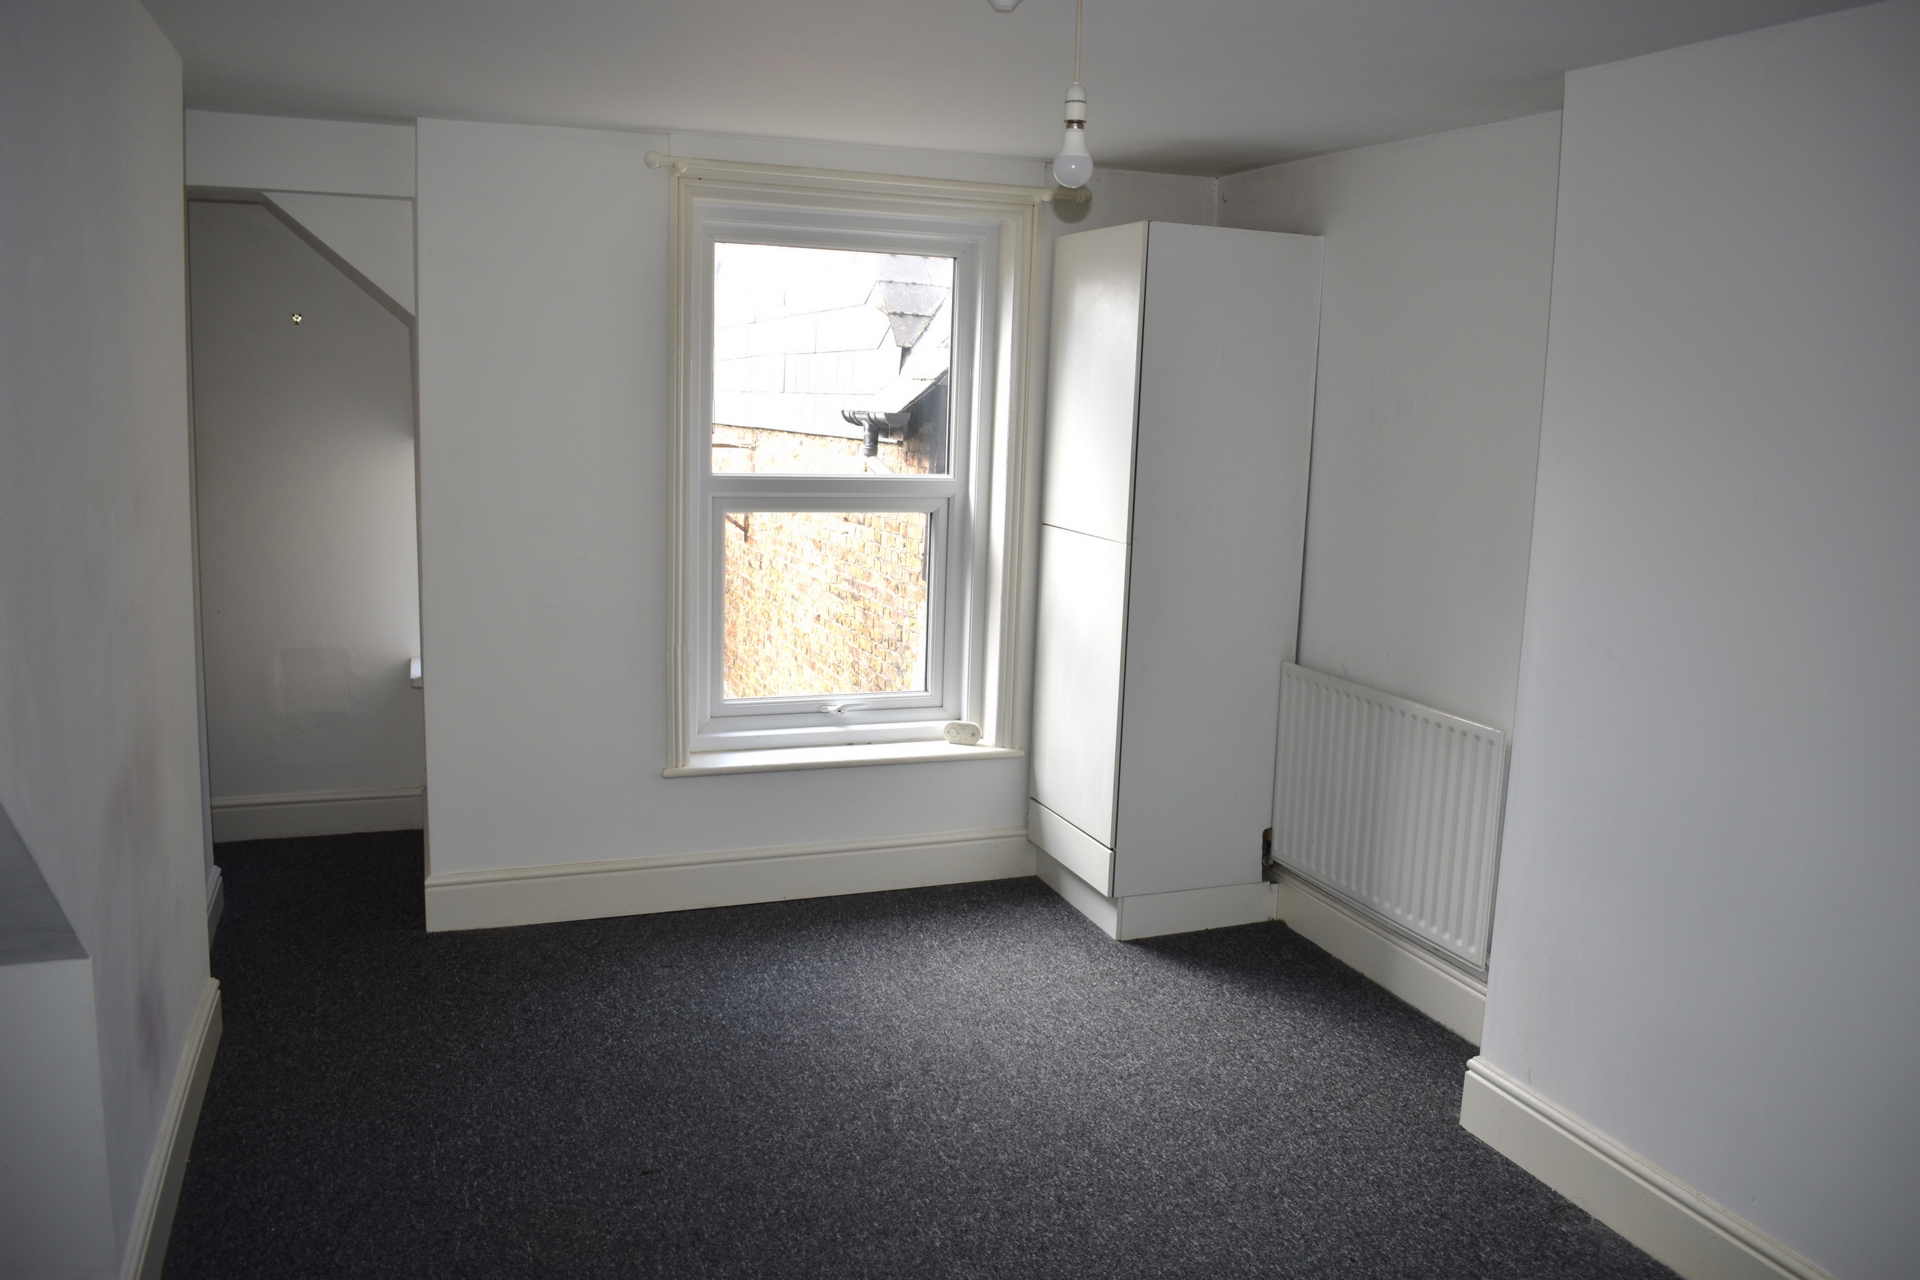 Henderson Setterfield are thrilled to offer this one bedroom 1st floor flat above Bessies Tea Room.  The property comprises 1 good size bedroom, fitted kitchen, bathroom and good size lounge. 